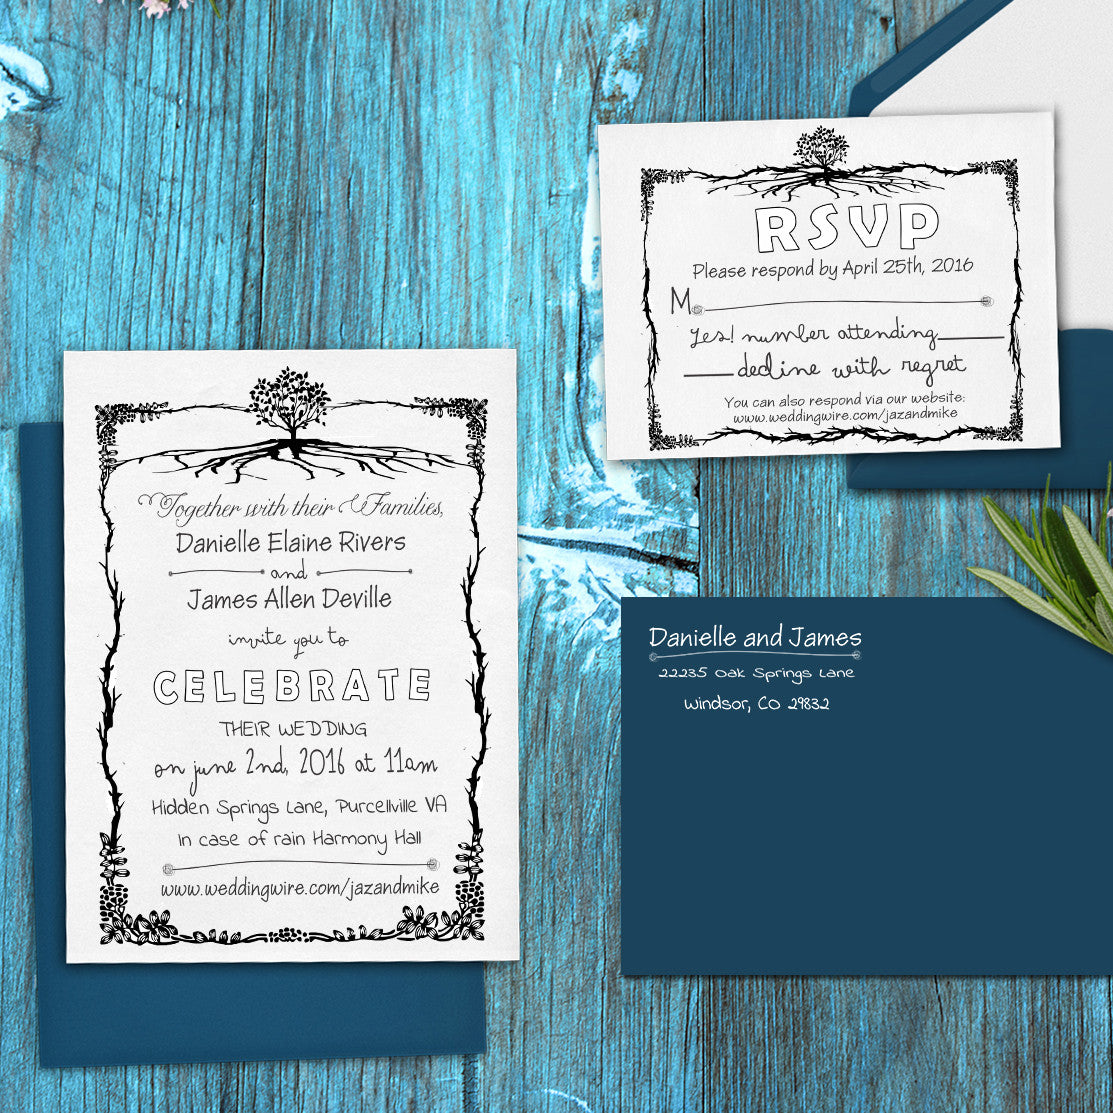 Rustic Wedding Stamps - Rustic Country Wedding Invitations